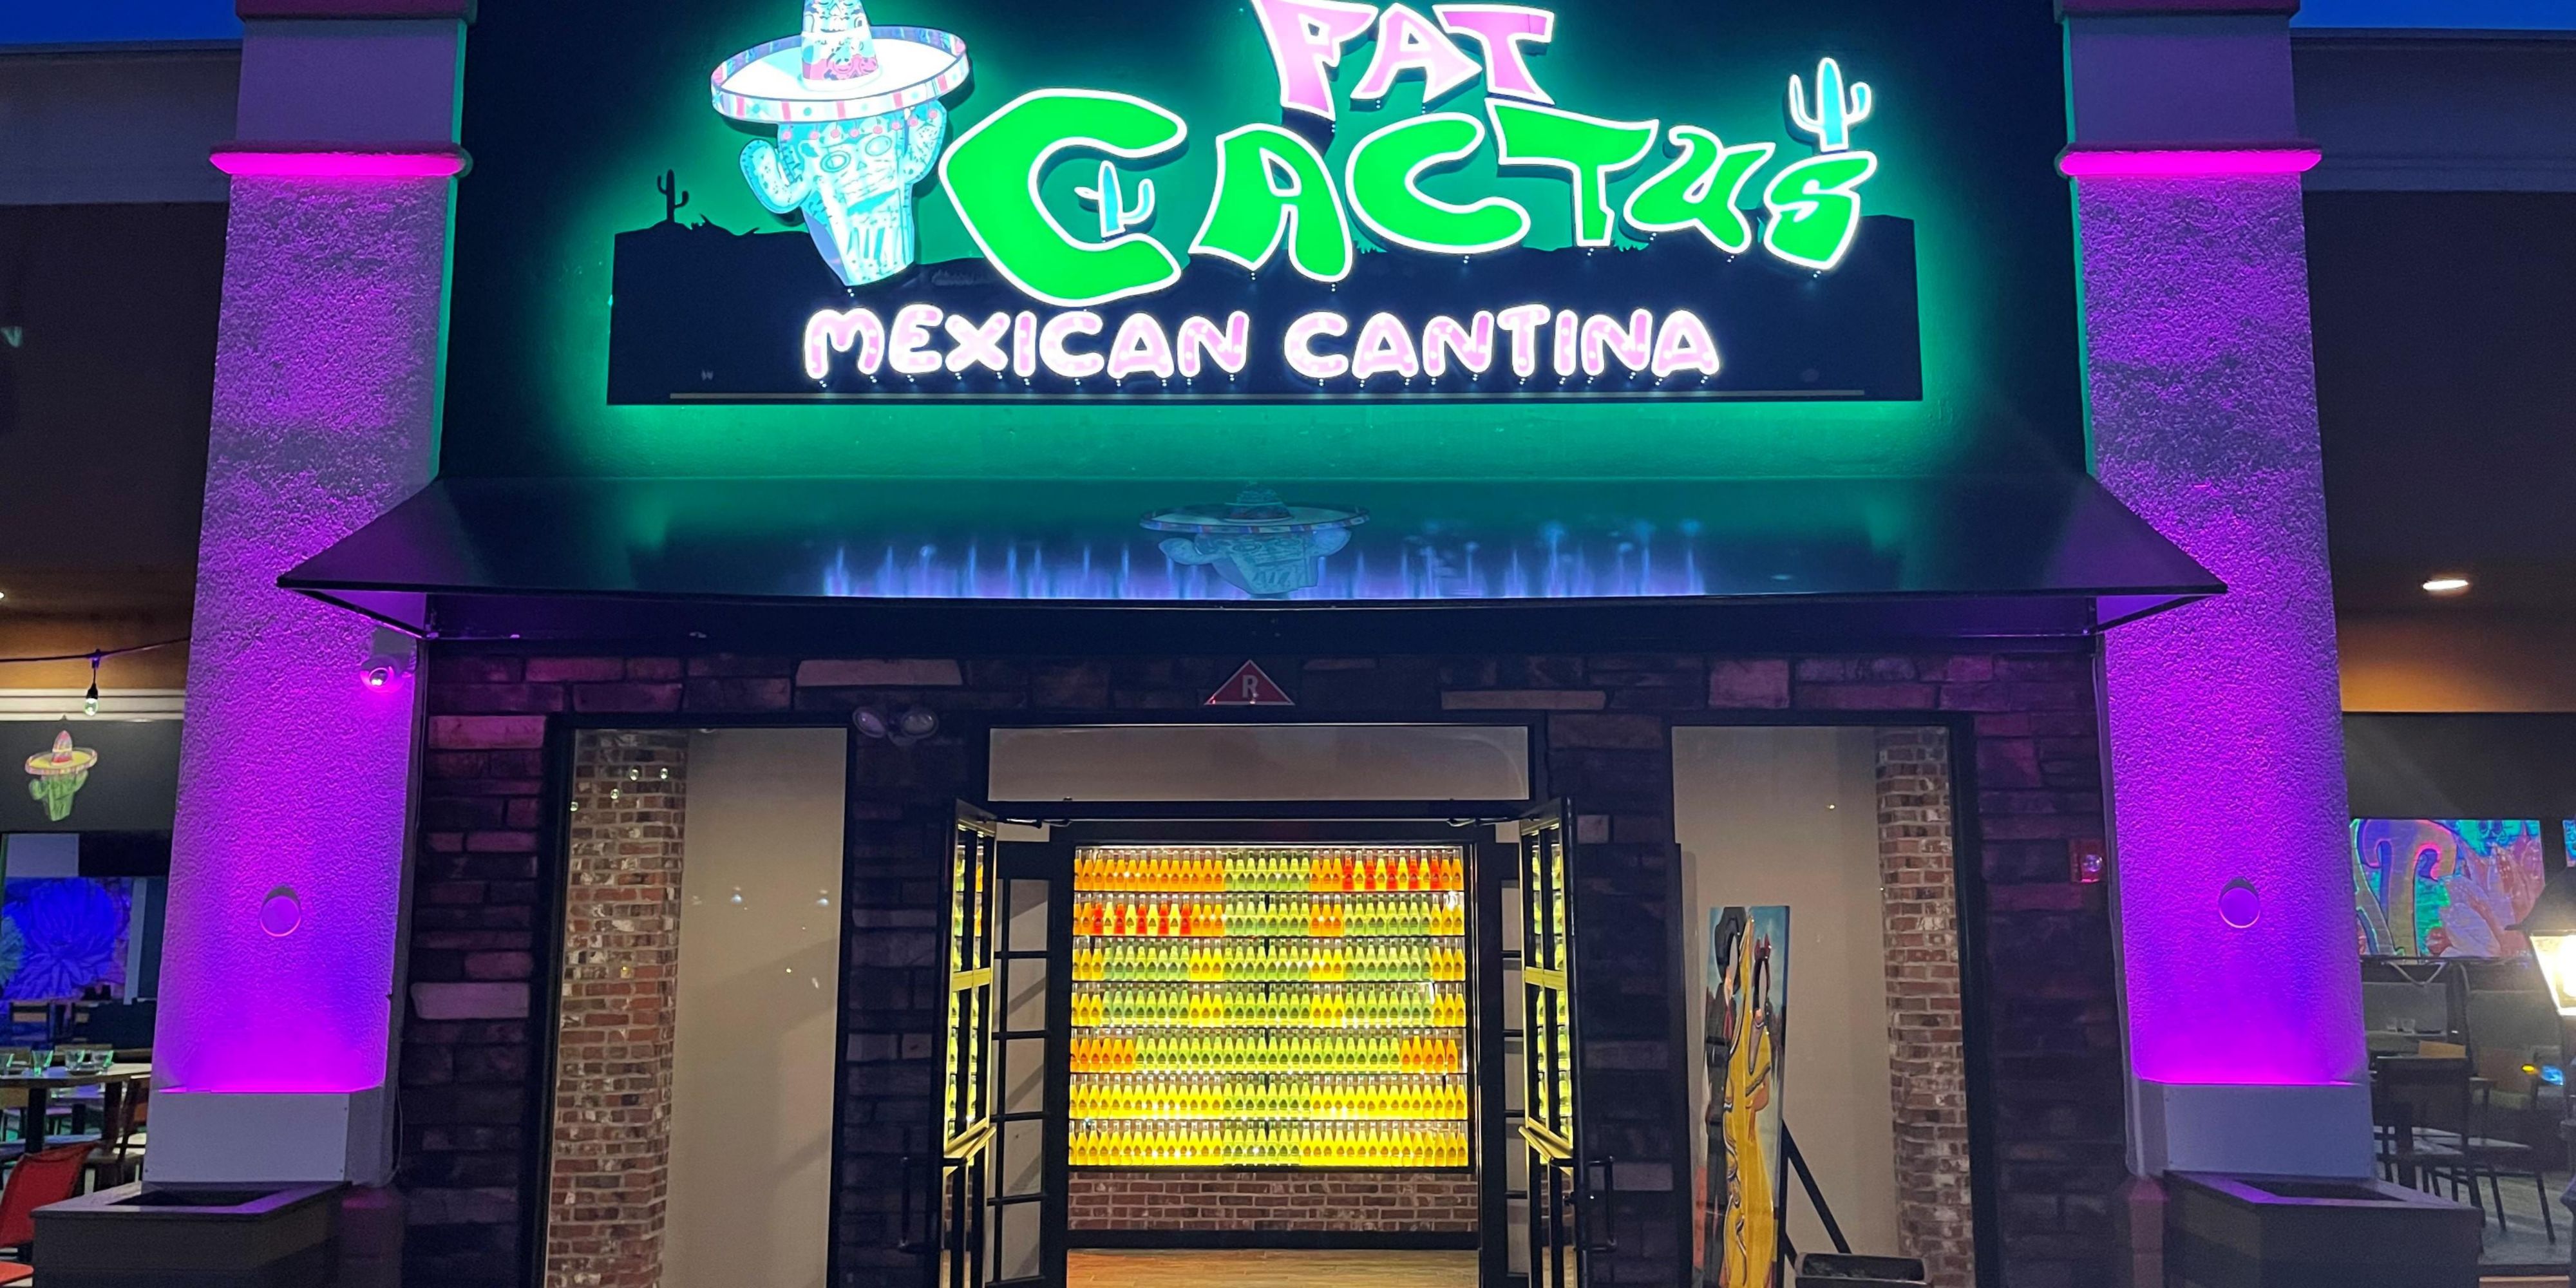 Welcome to Fat Cactus Mexican Cantina